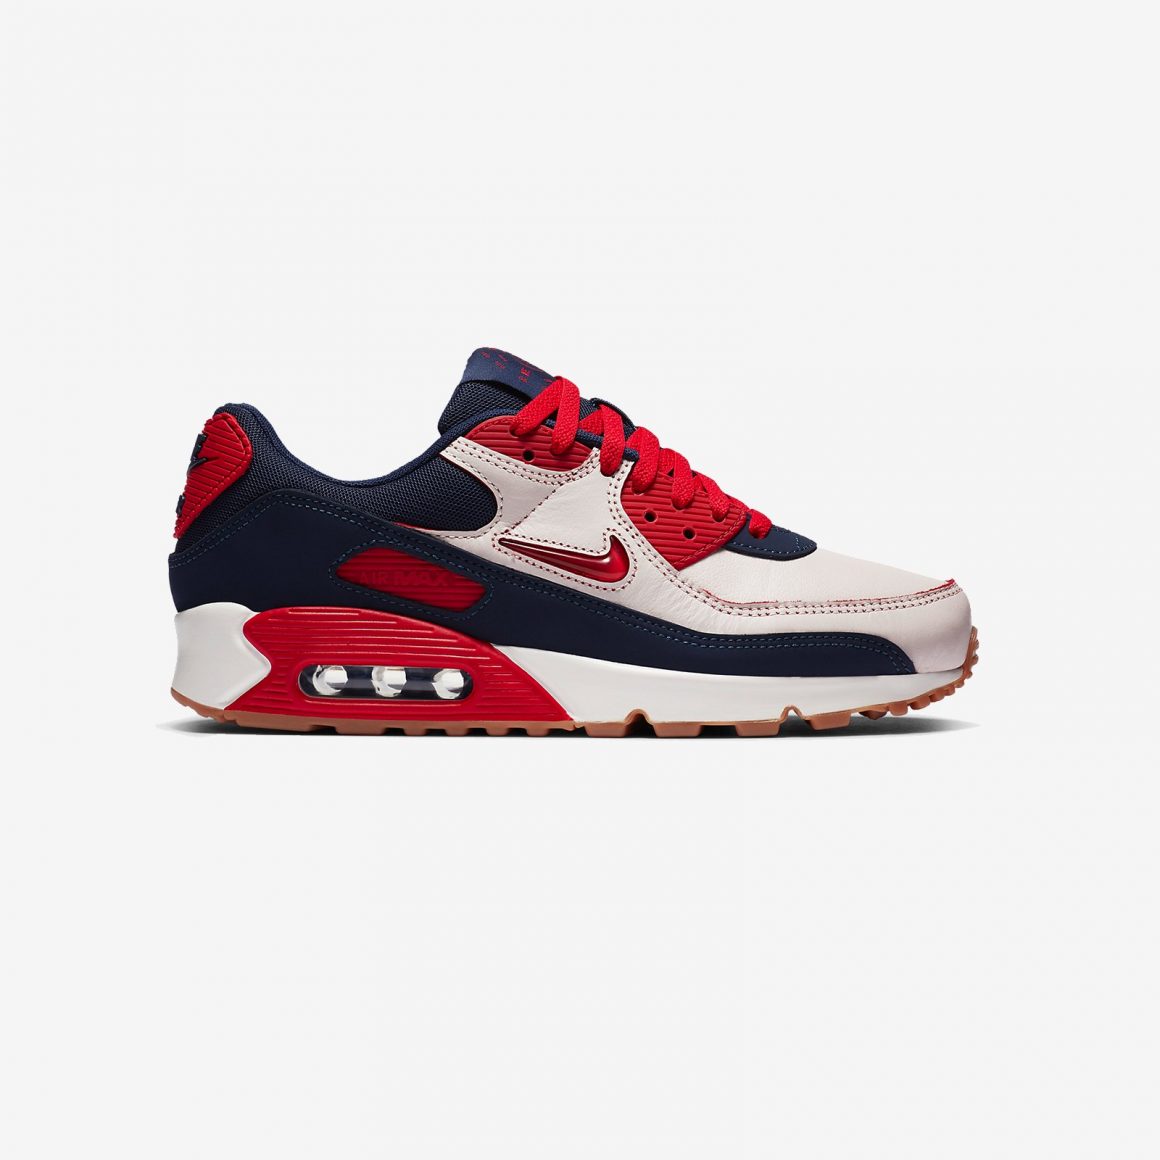 Nike Air Max 90 PRM ‘’Home and Away’’ - ‘’University Red’’ - CJ0611-101